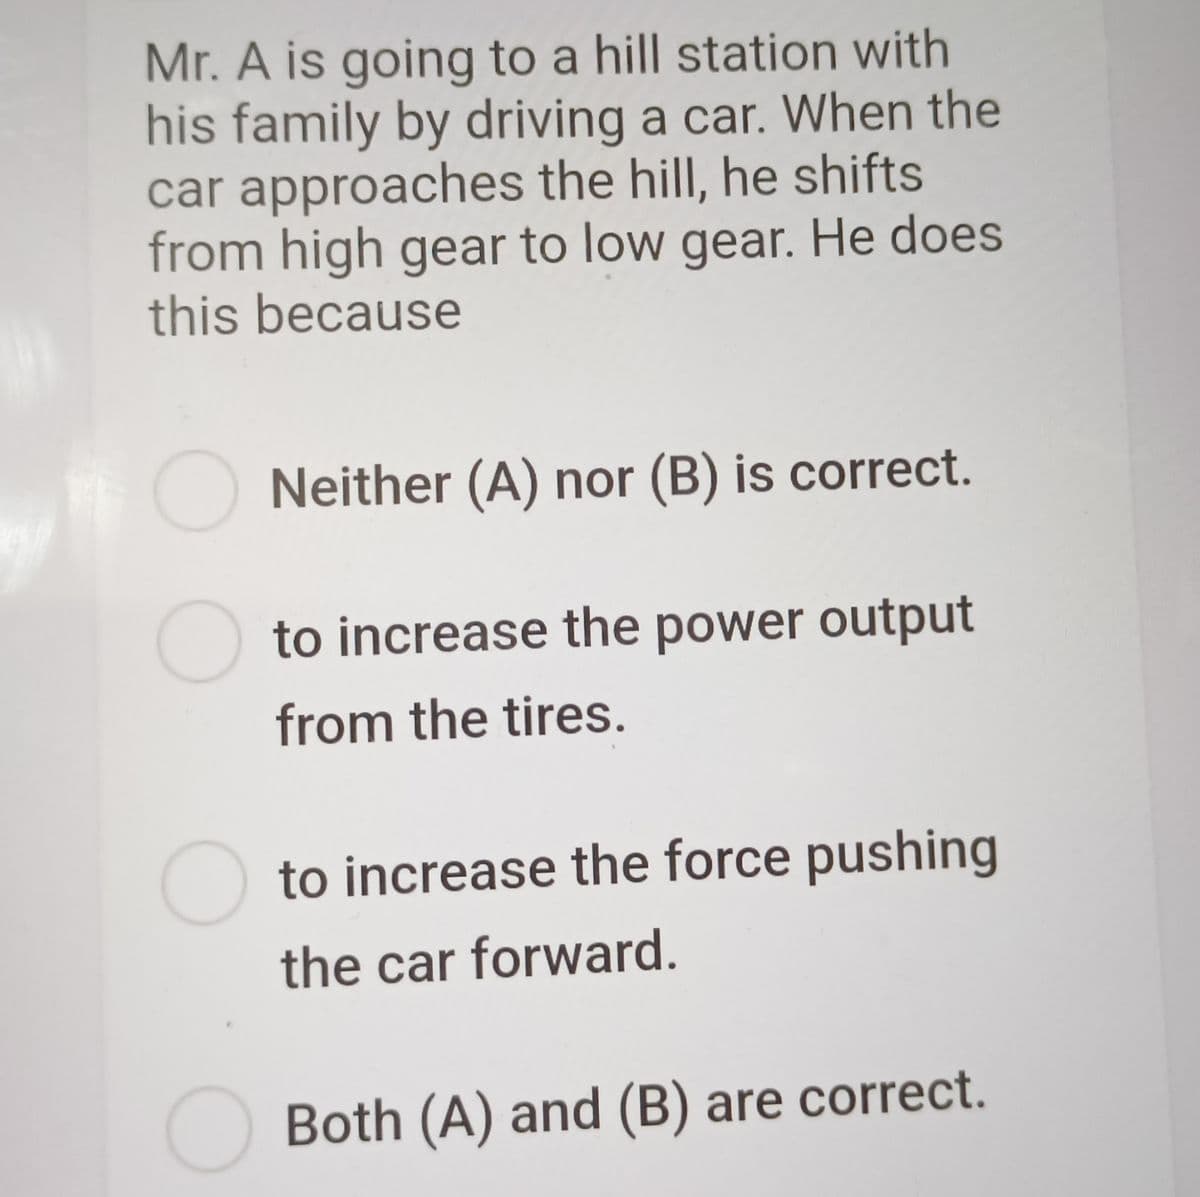 Mr. A is going to a hill station with
his family by driving a car. When the
car approaches the hill, he shifts
from high gear to low gear. He does
this because
Neither (A) nor (B) is correct.
to increase the power output
from the tires.
to increase the force pushing
the car forward.
Both (A) and (B) are correct.
